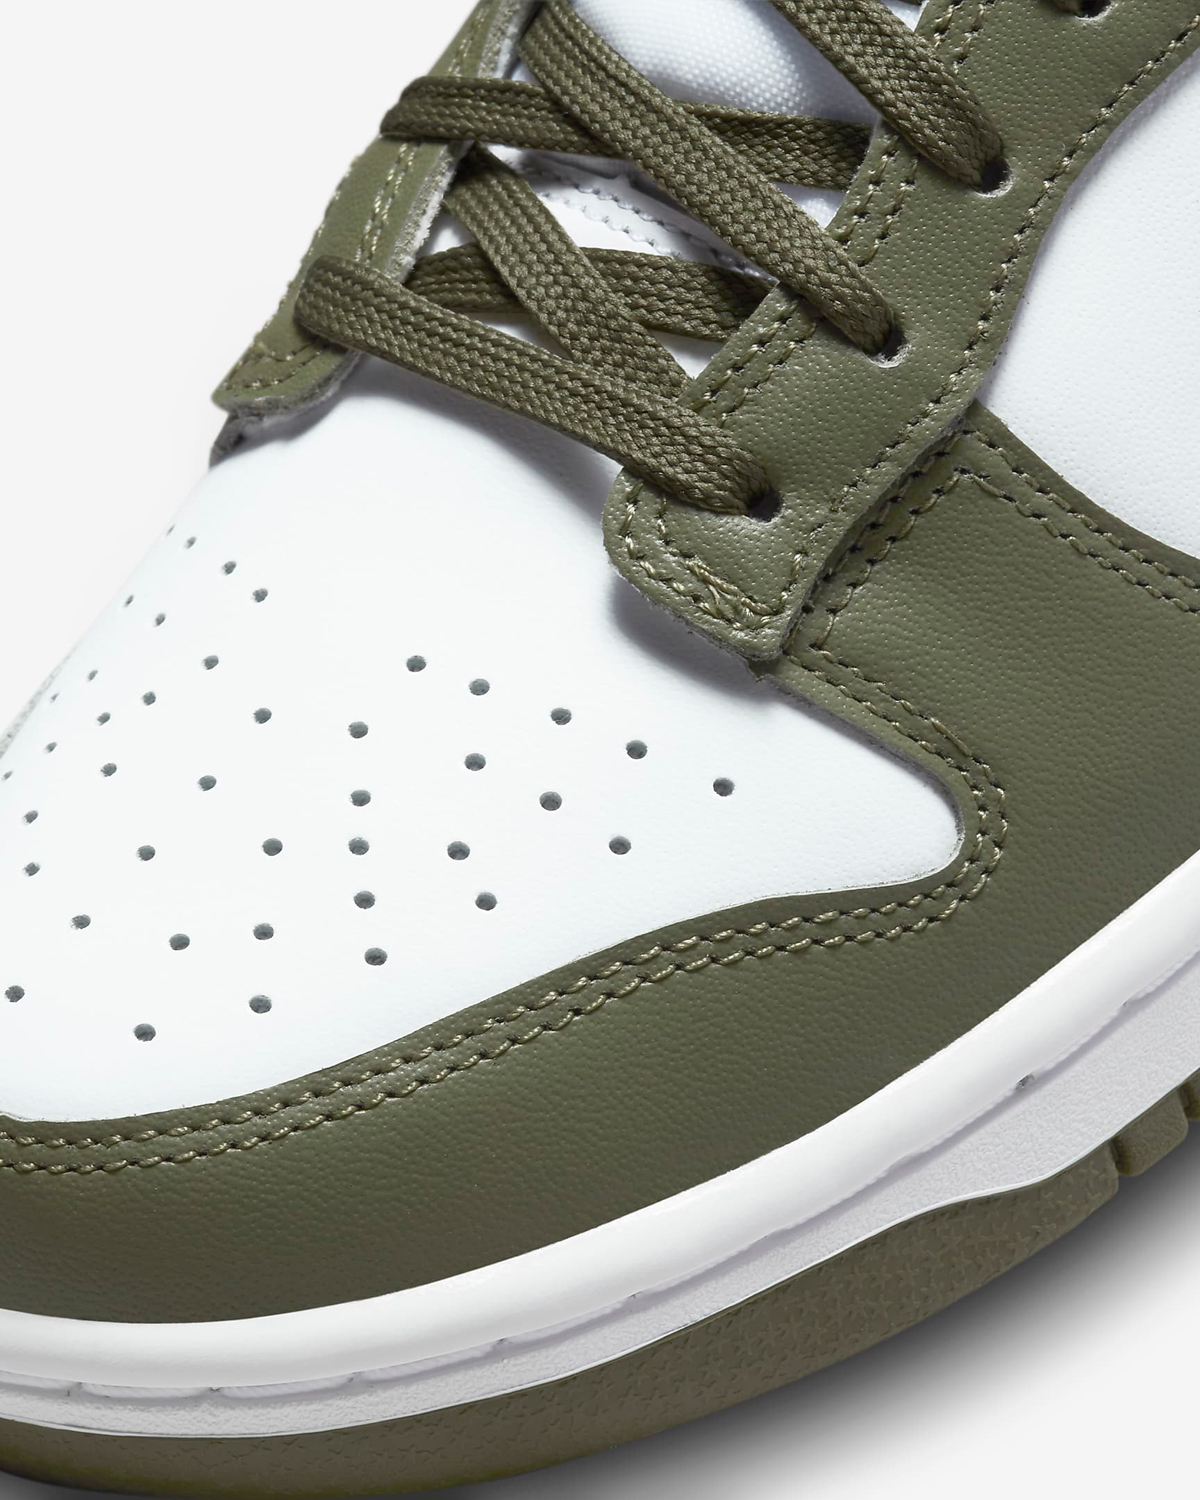 Nike-Dunk-Low-Medium-Olive-Release-Date-8